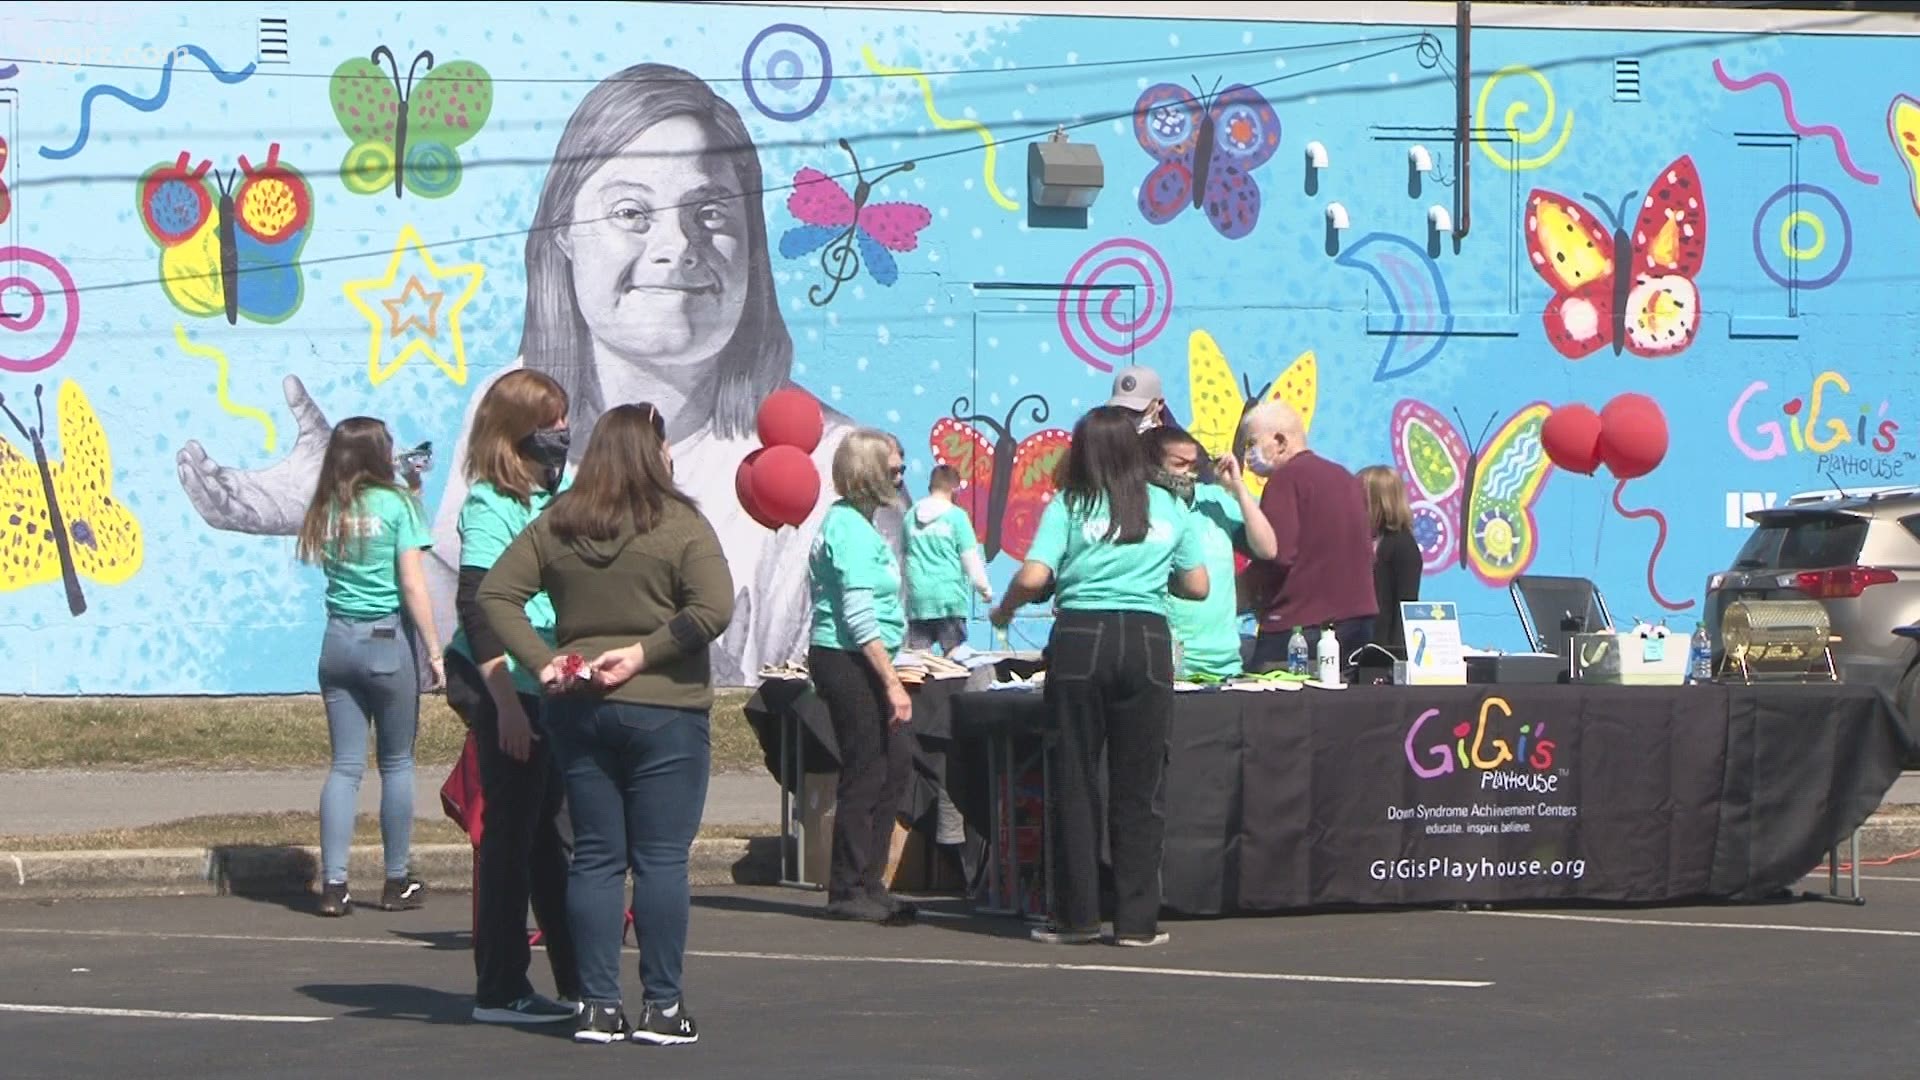 The group Gigi's Playhouse held a parking lot party today for family and friends of people with down syndrome.